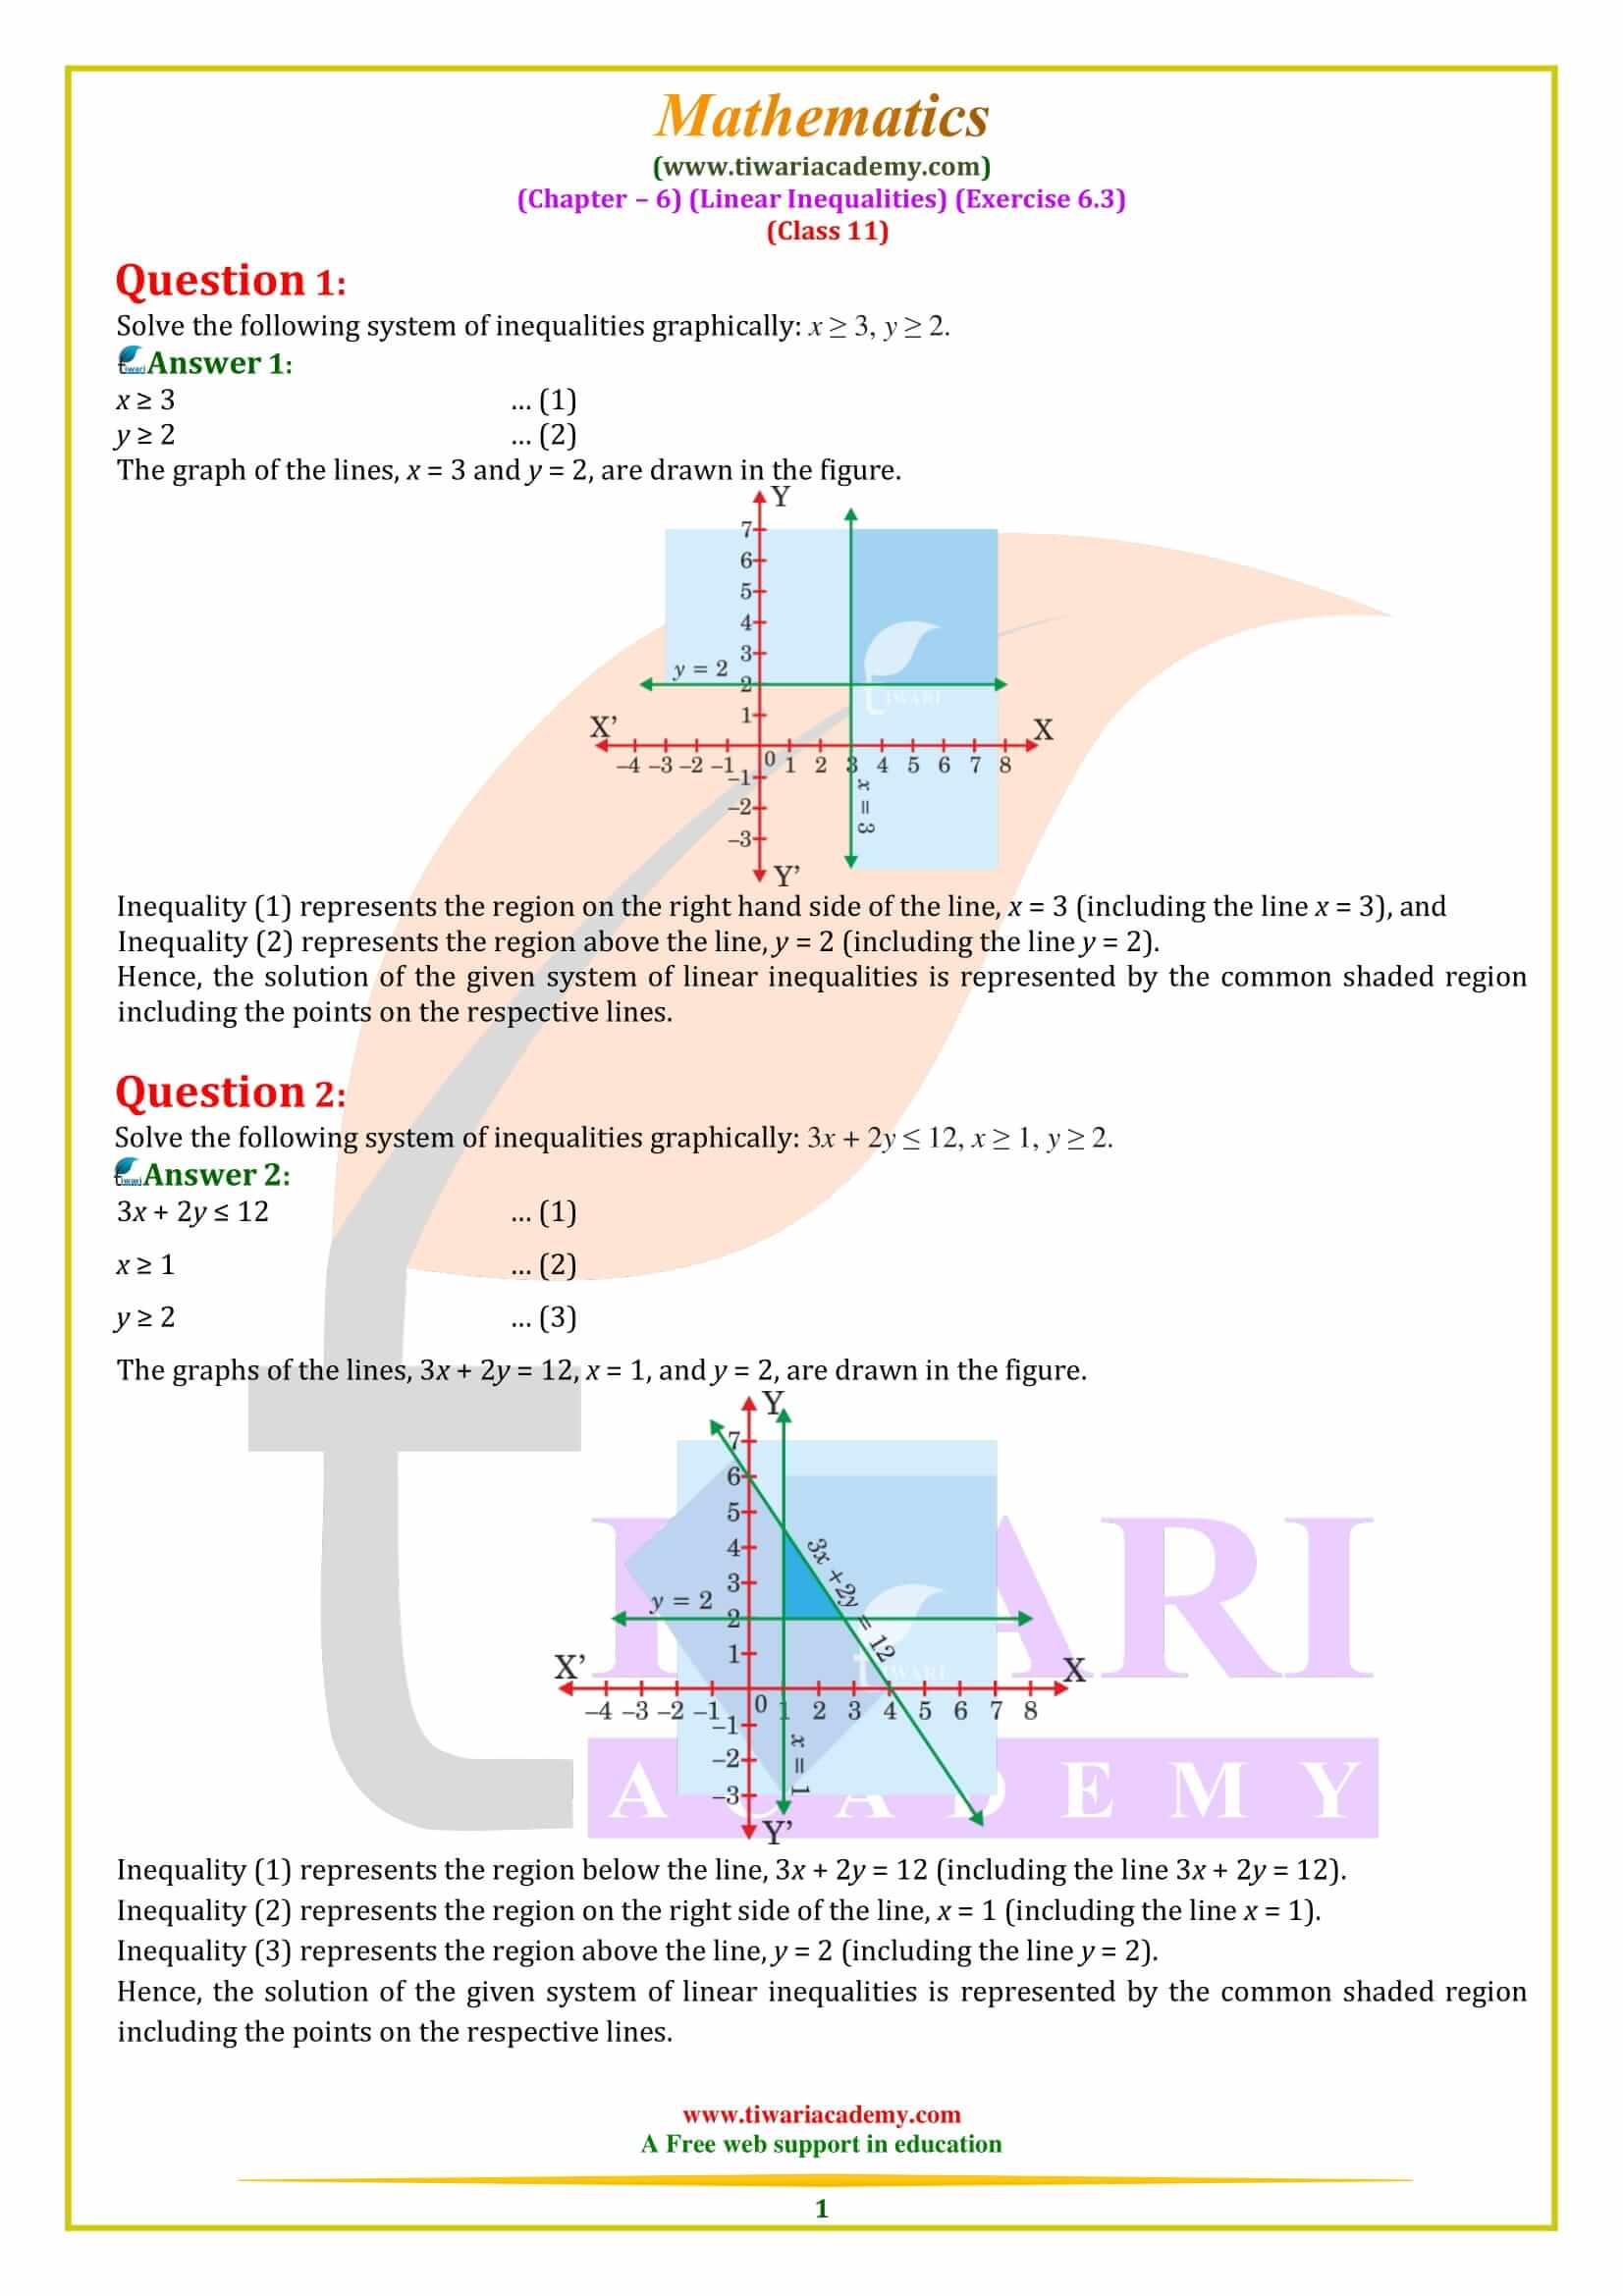 Class 11 Maths Exercise 6.3 Linear Inequalities